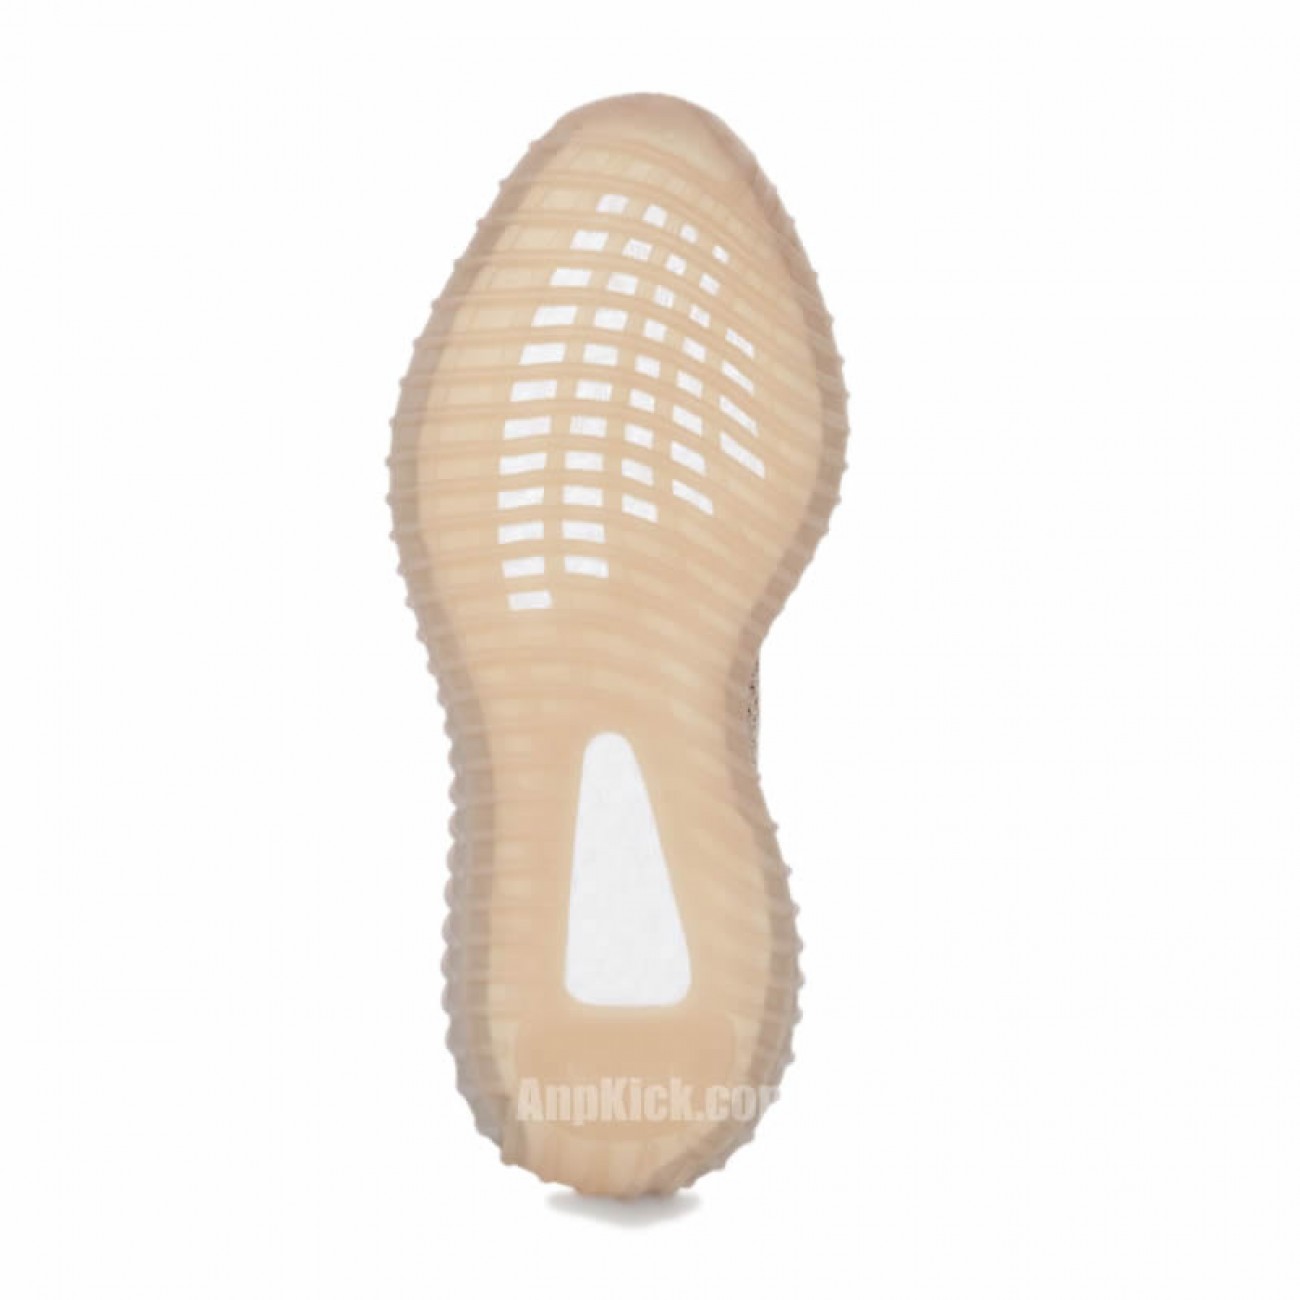 adidas Yeezy Boost 350 V2 "Clay" 2019 For Sale Release Date EG7490